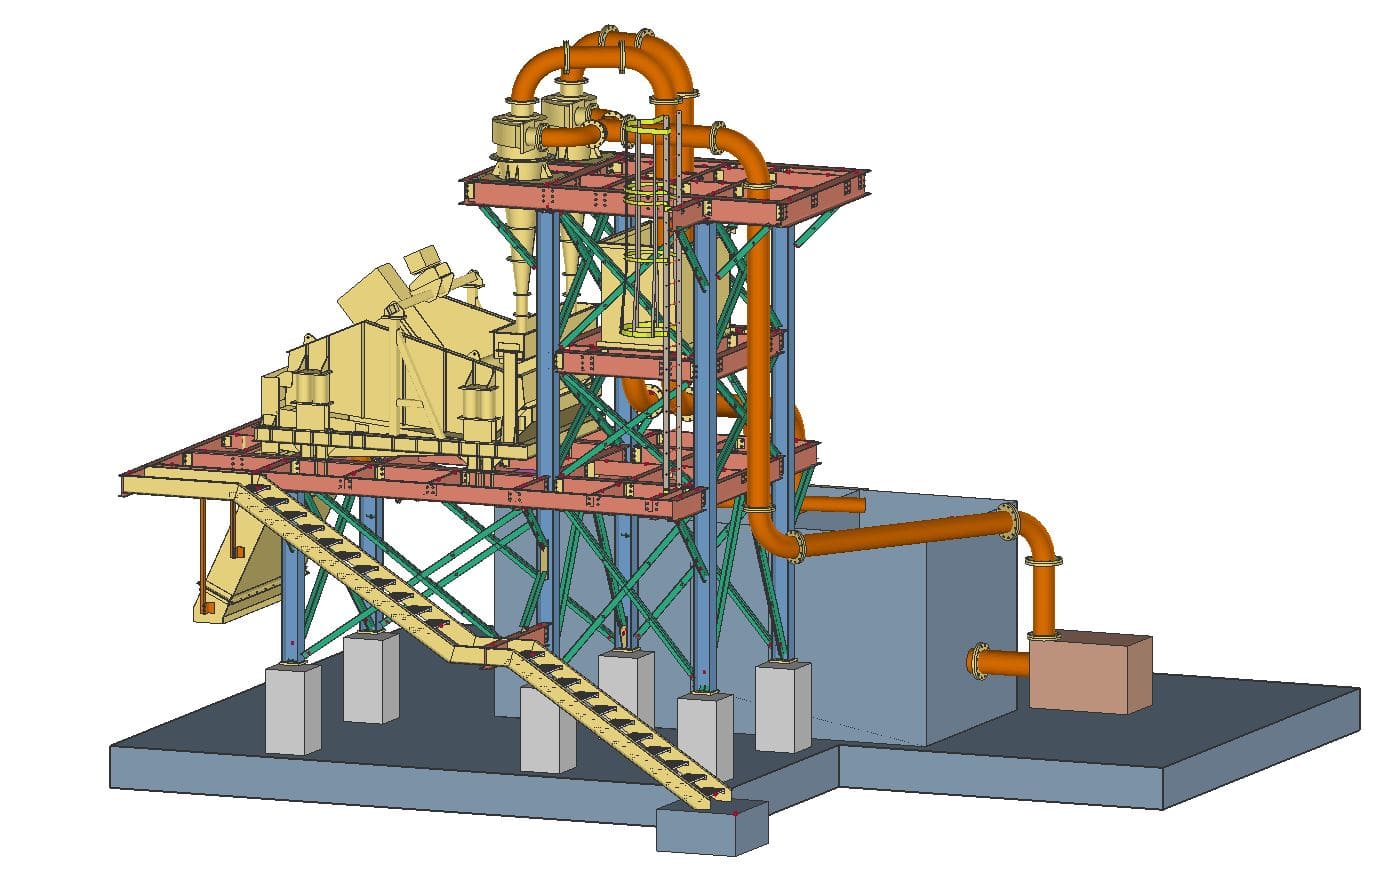 A dewatering screen structure design